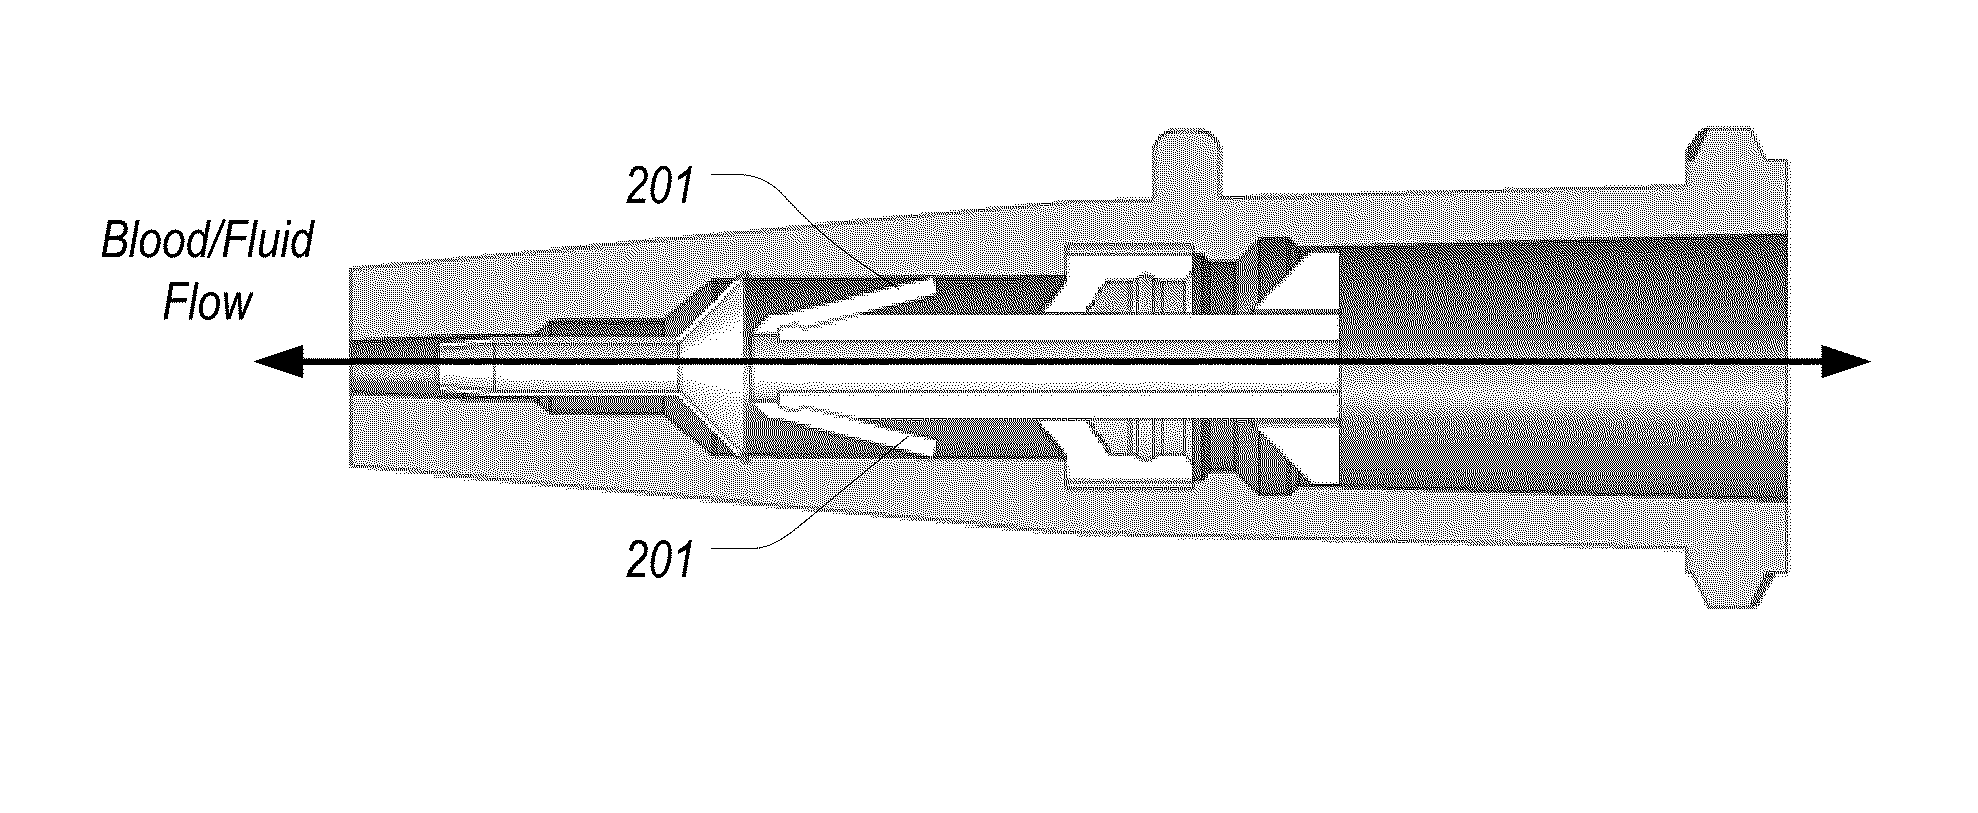 Blood control catheter valve employing actuator with flexible retention arms